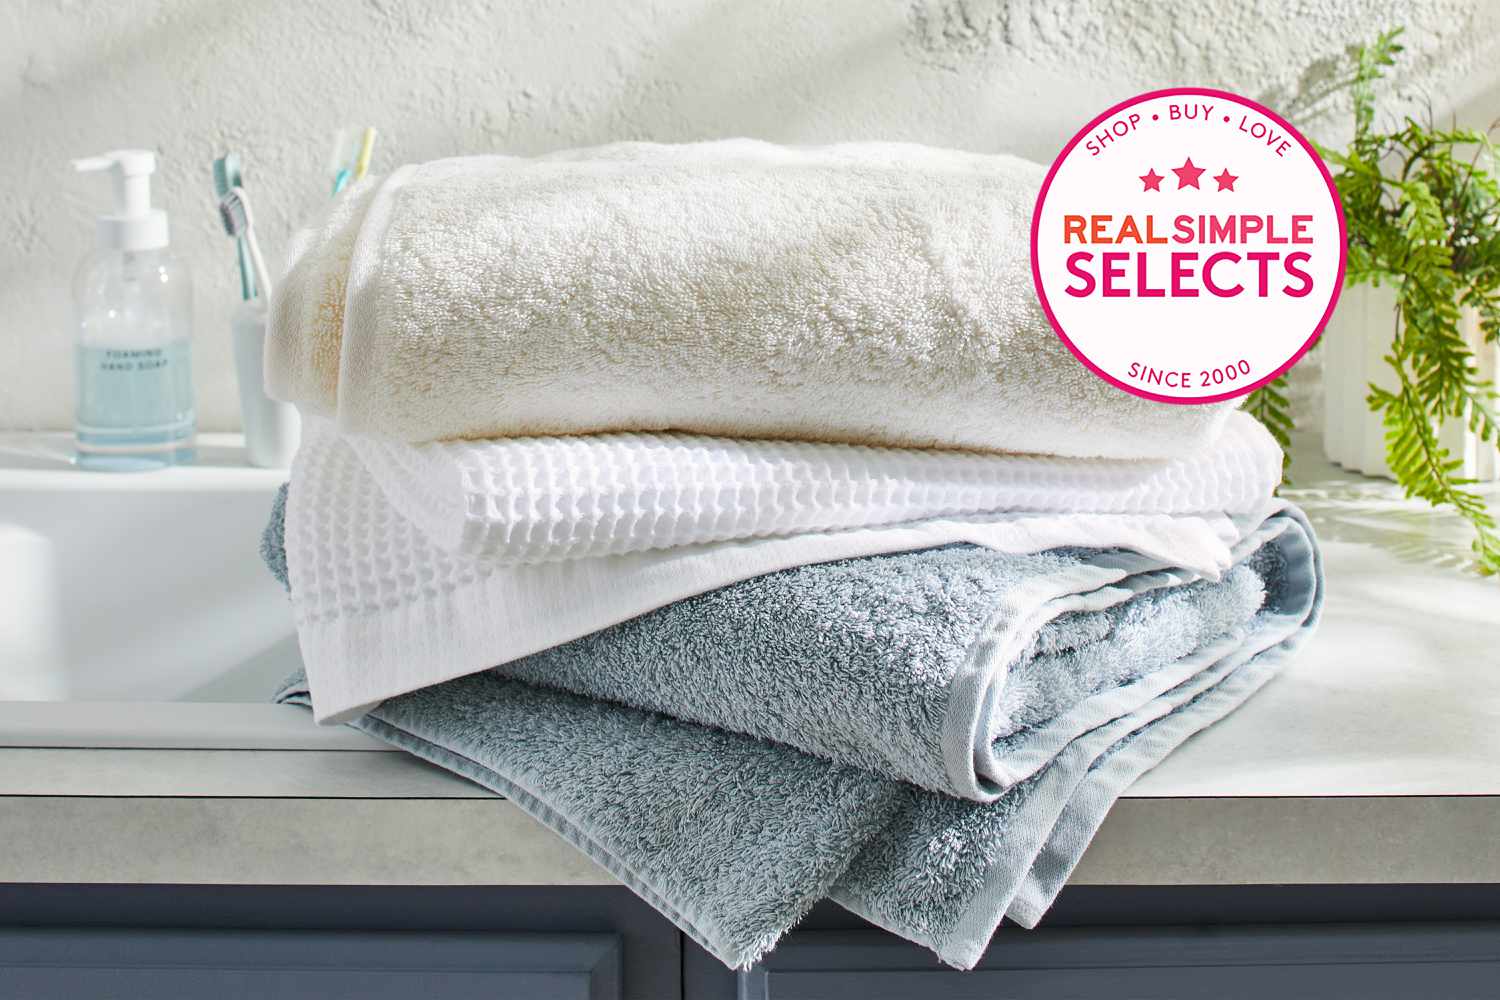 A selection of some of the best bath towels stacked on a counter